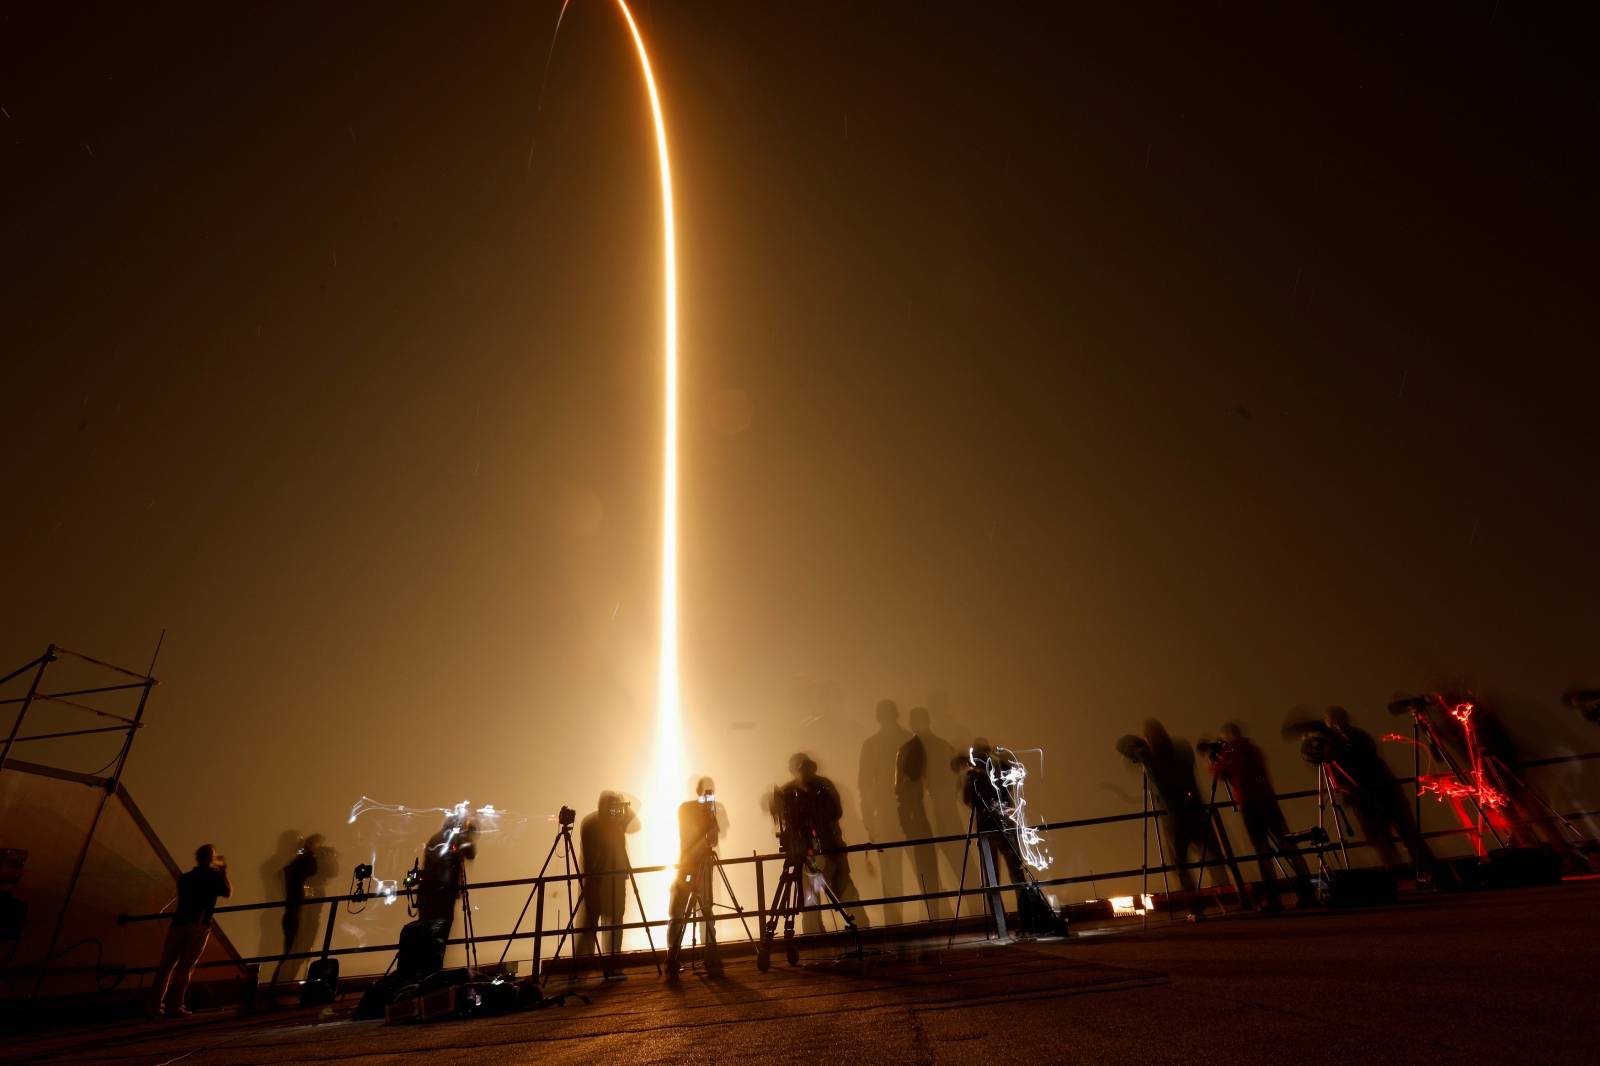 SpaceX Falcon 9 rocket lifts off to ISS from the Kennedy Space Center